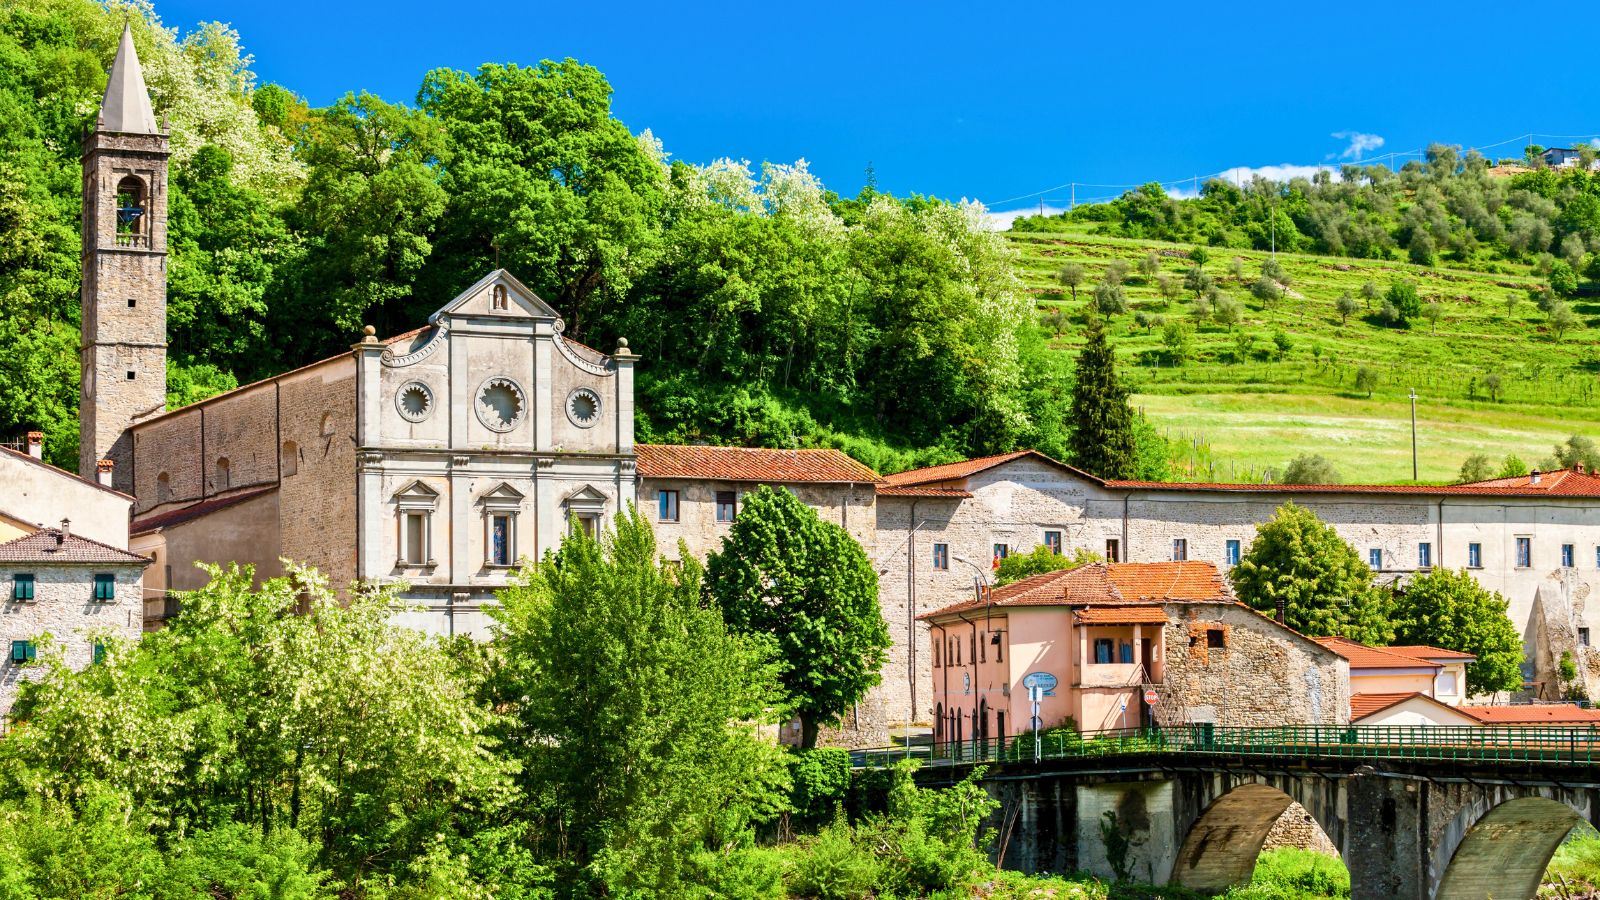 <p><span>This hidden gem in northern Tuscany offers a taste of traditional, off-the-tourist-trail Italy. </span><span>A historic market town at the foot of the Apennine Mountains, Pontremoli offers bucket-loads of old-world charm and easy access to nature. </span></p><p><span>Expect baroque cathedrals, medieval bridges, two beautiful rivers, and quaint piazzas bustling with locals.</span></p>